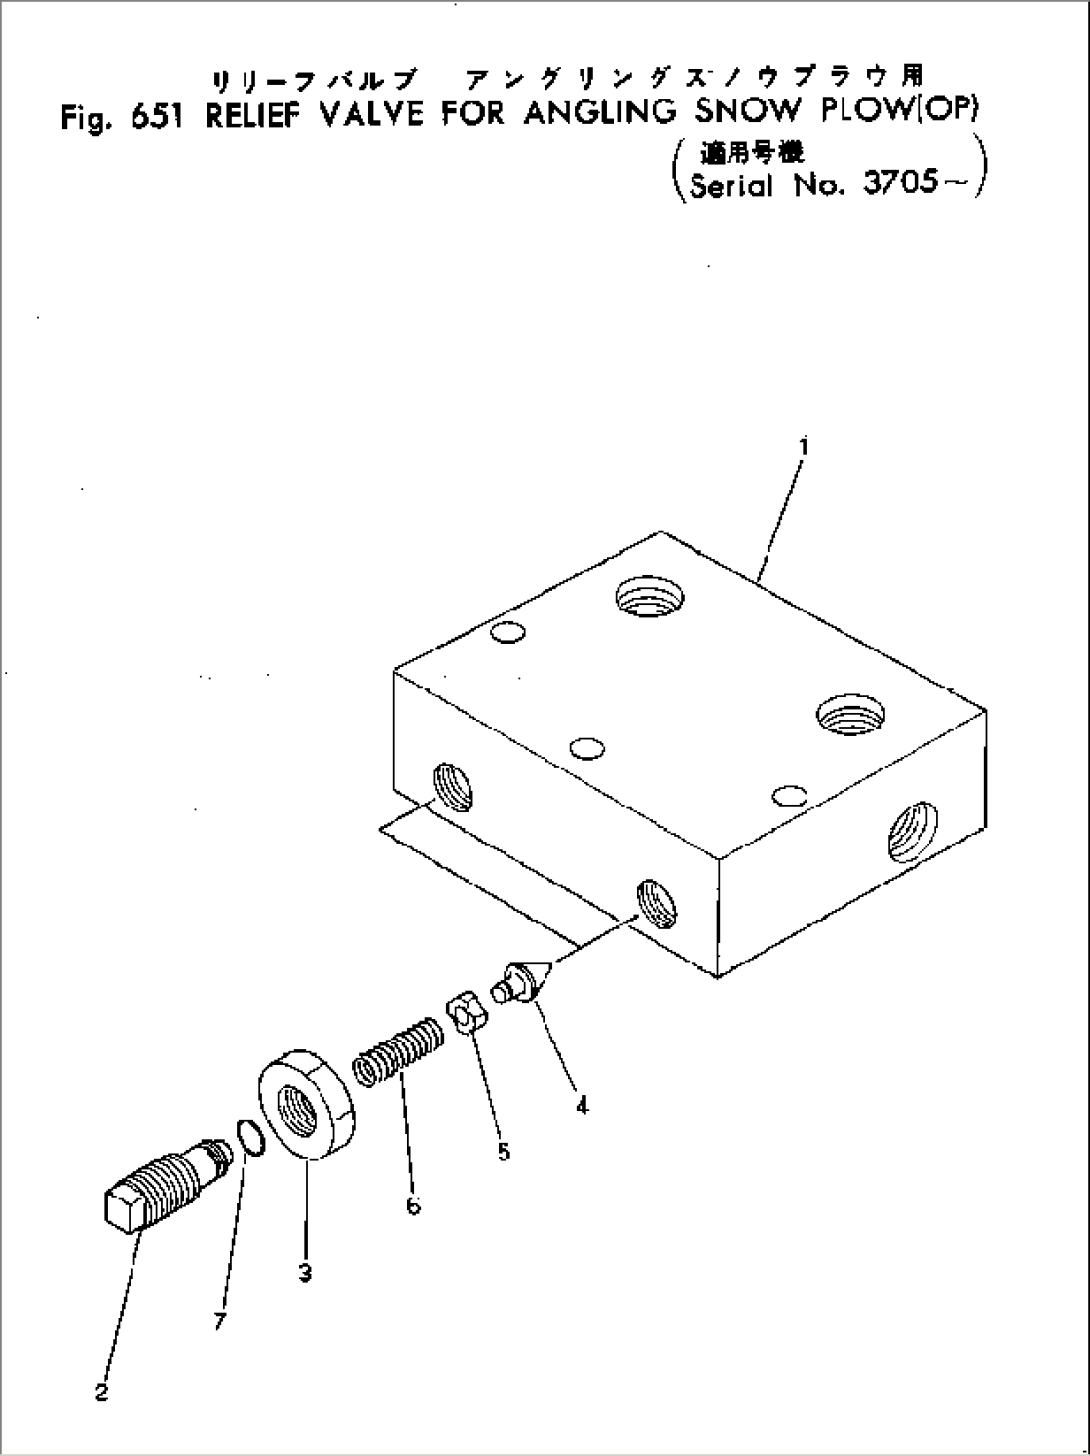 RELIEF VALVE FOR ANGLING SNOW PLOW (OP)(#3705-)